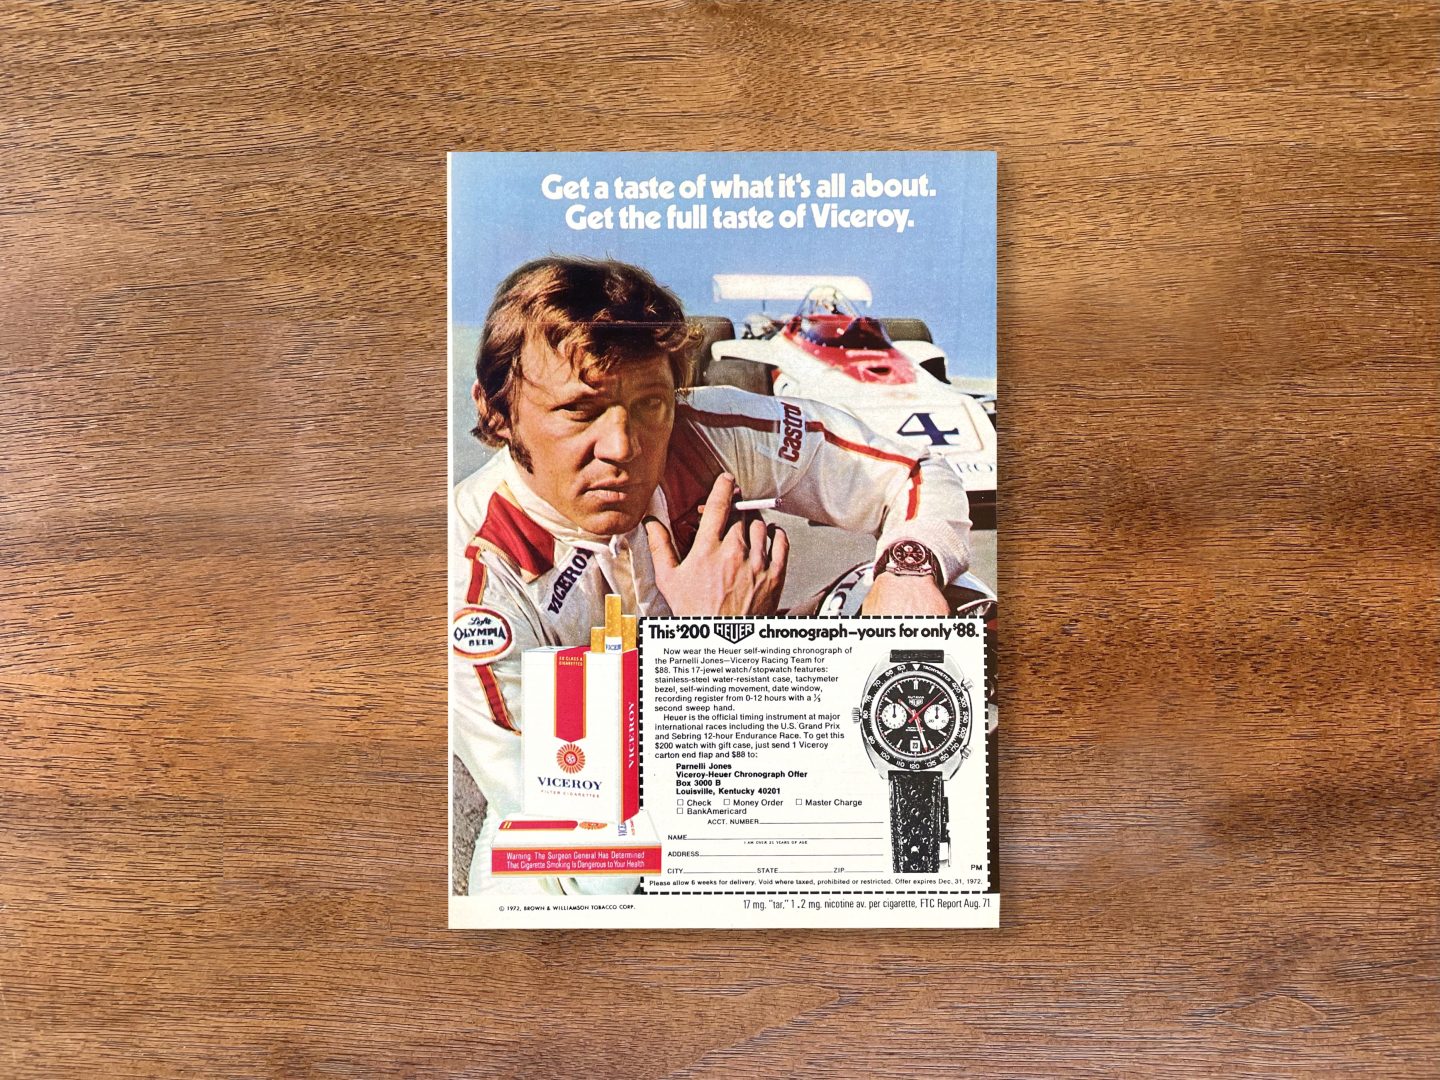 Old timers: The vintage '70s ads that made Heuer tick 2022-06